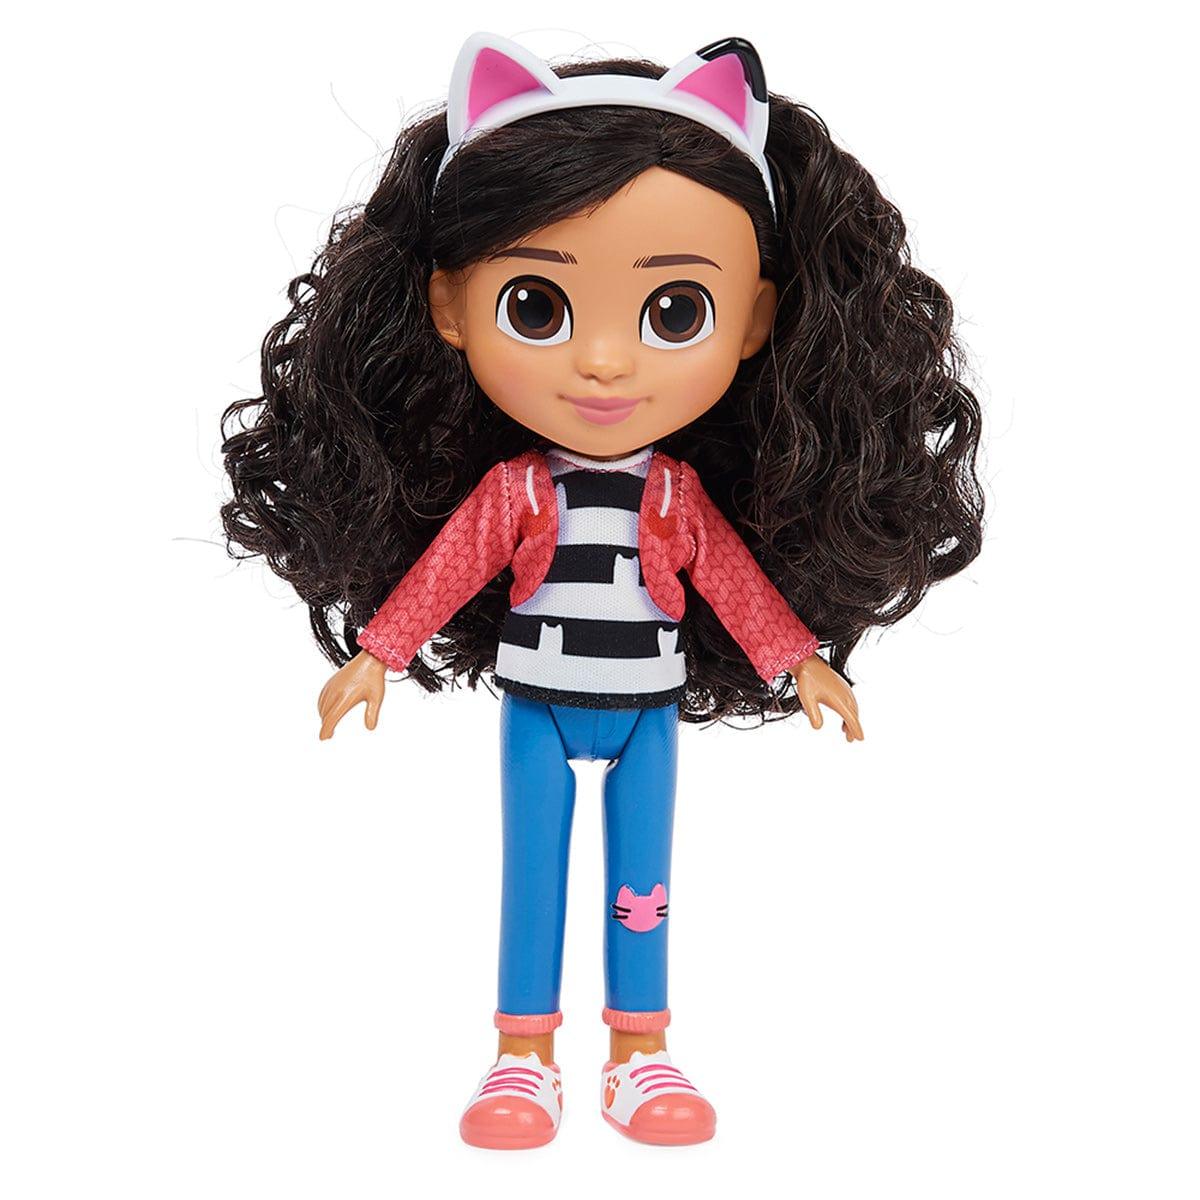 JOUET K.I.D. INC. Toys & Games Gabby's Dollhouse Doll, 8 in, Removable Cat Ears